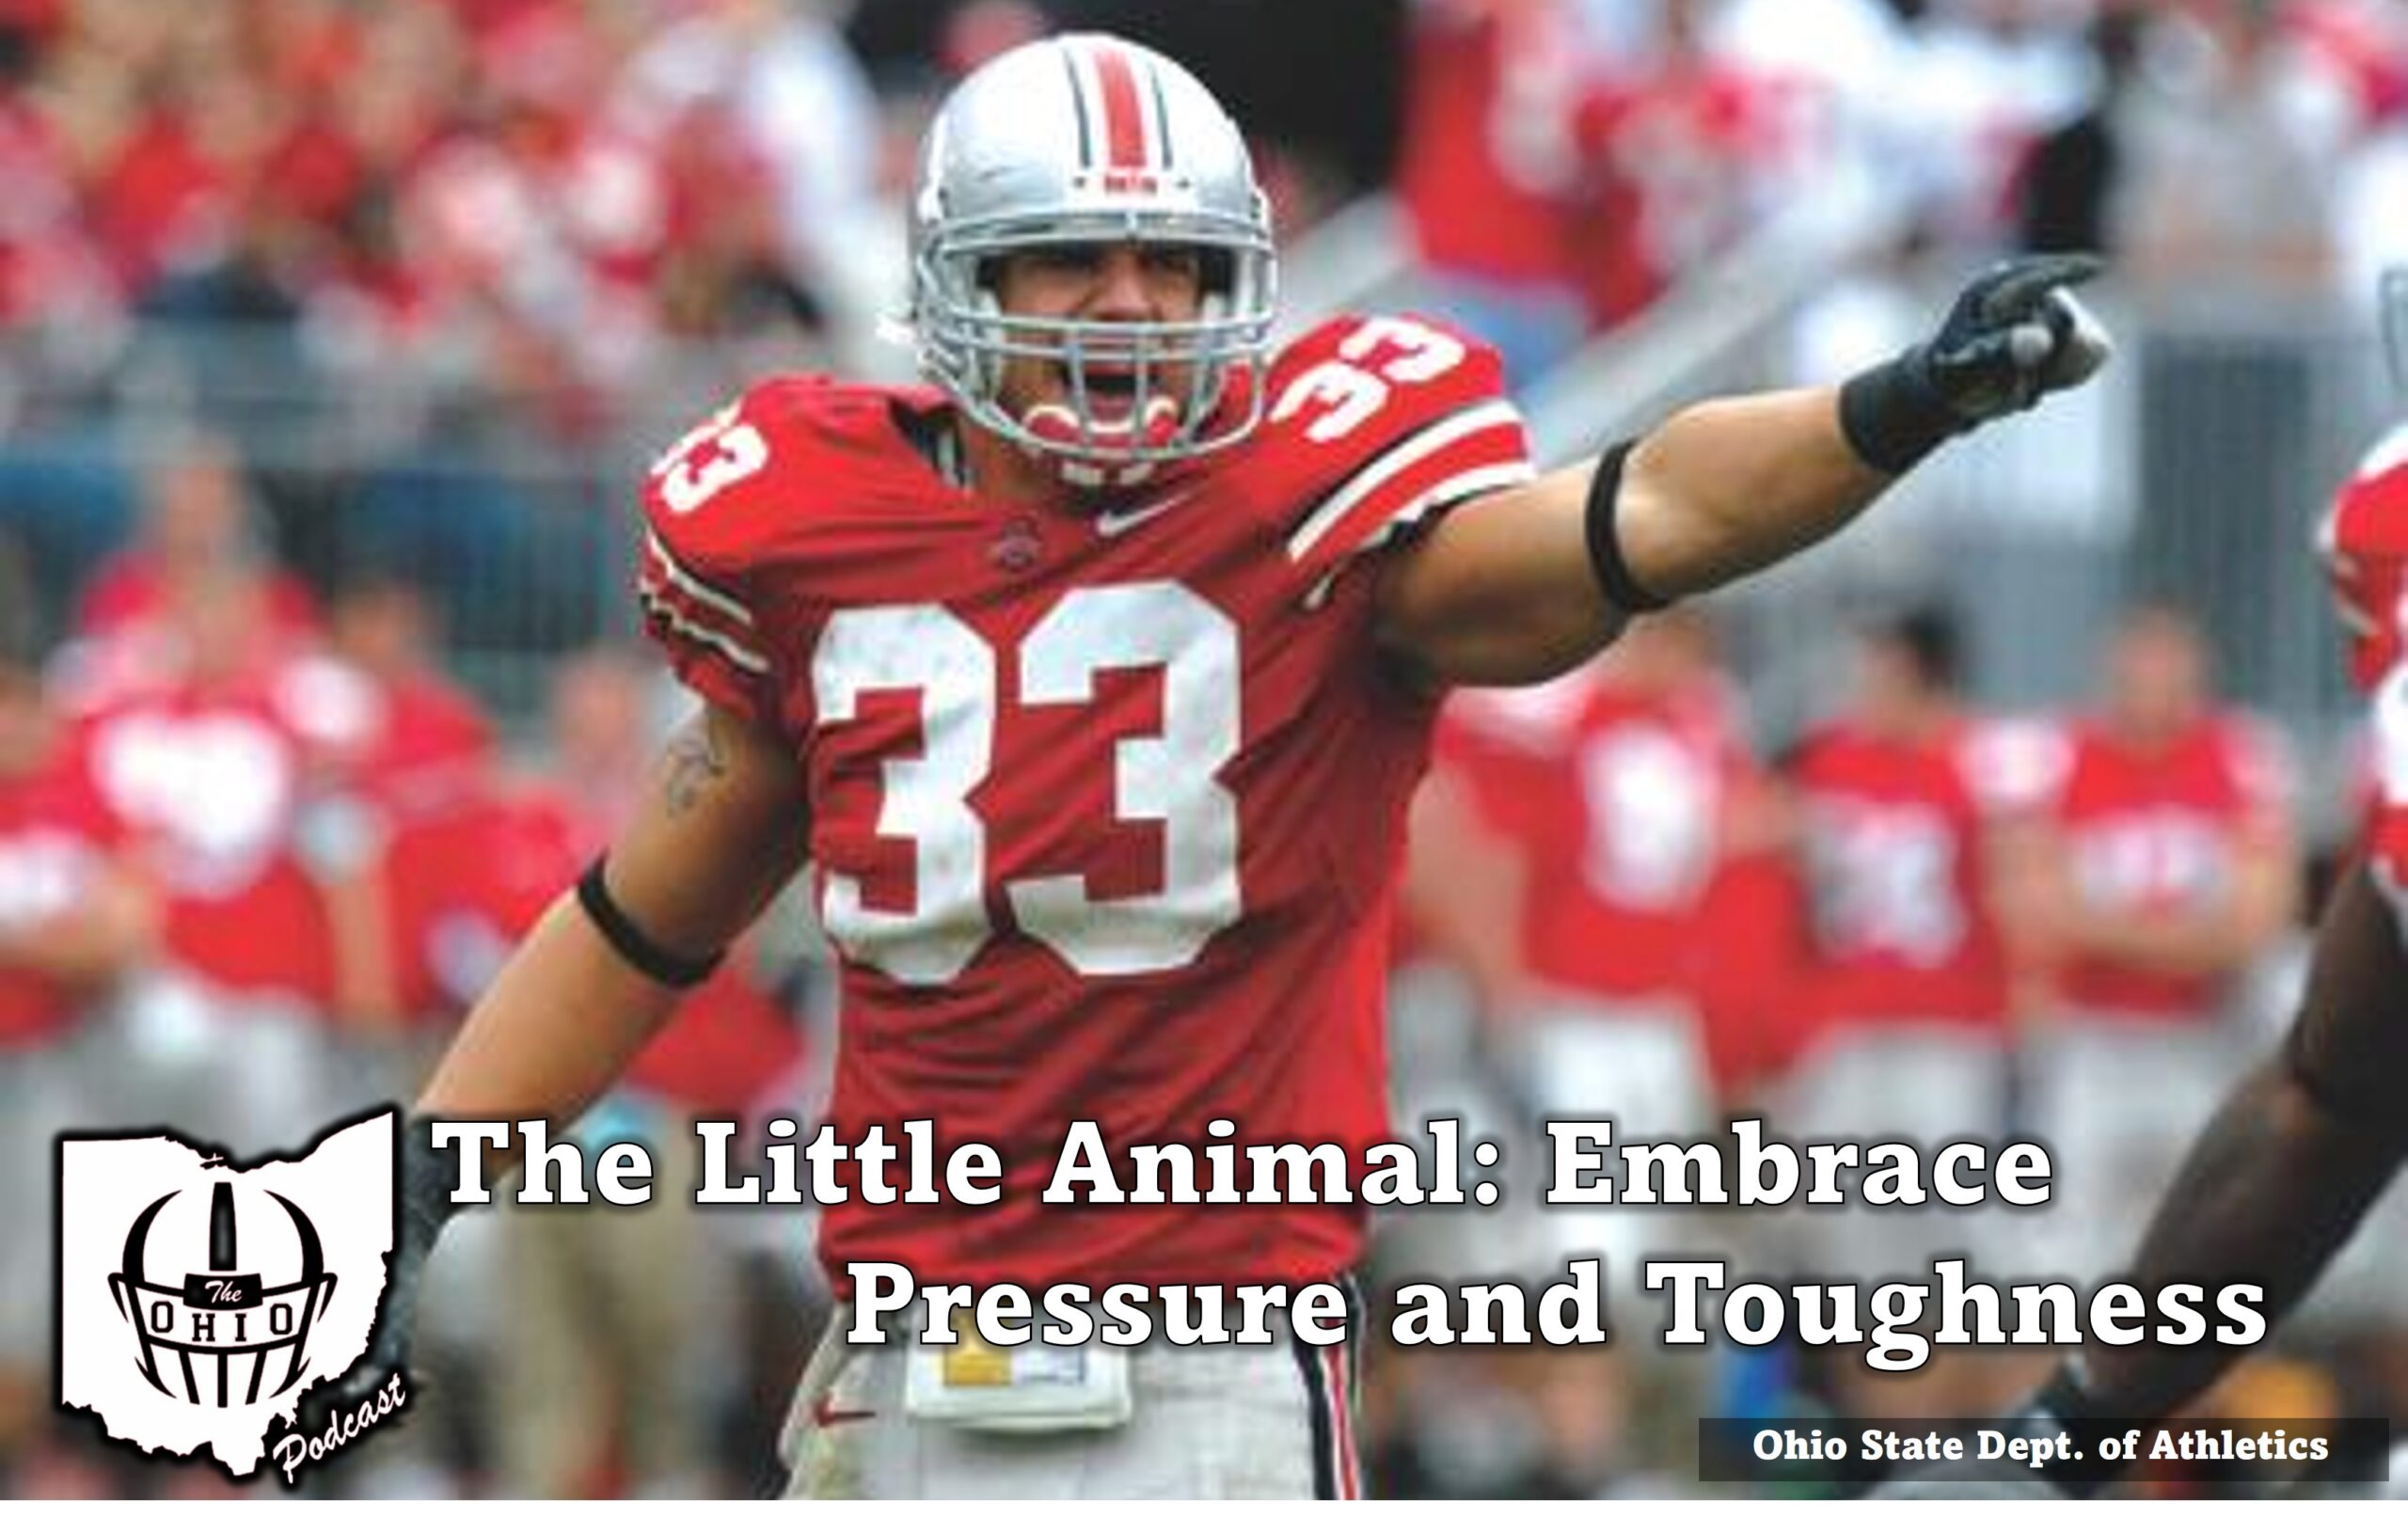 Embrace Pressure and Toughness.